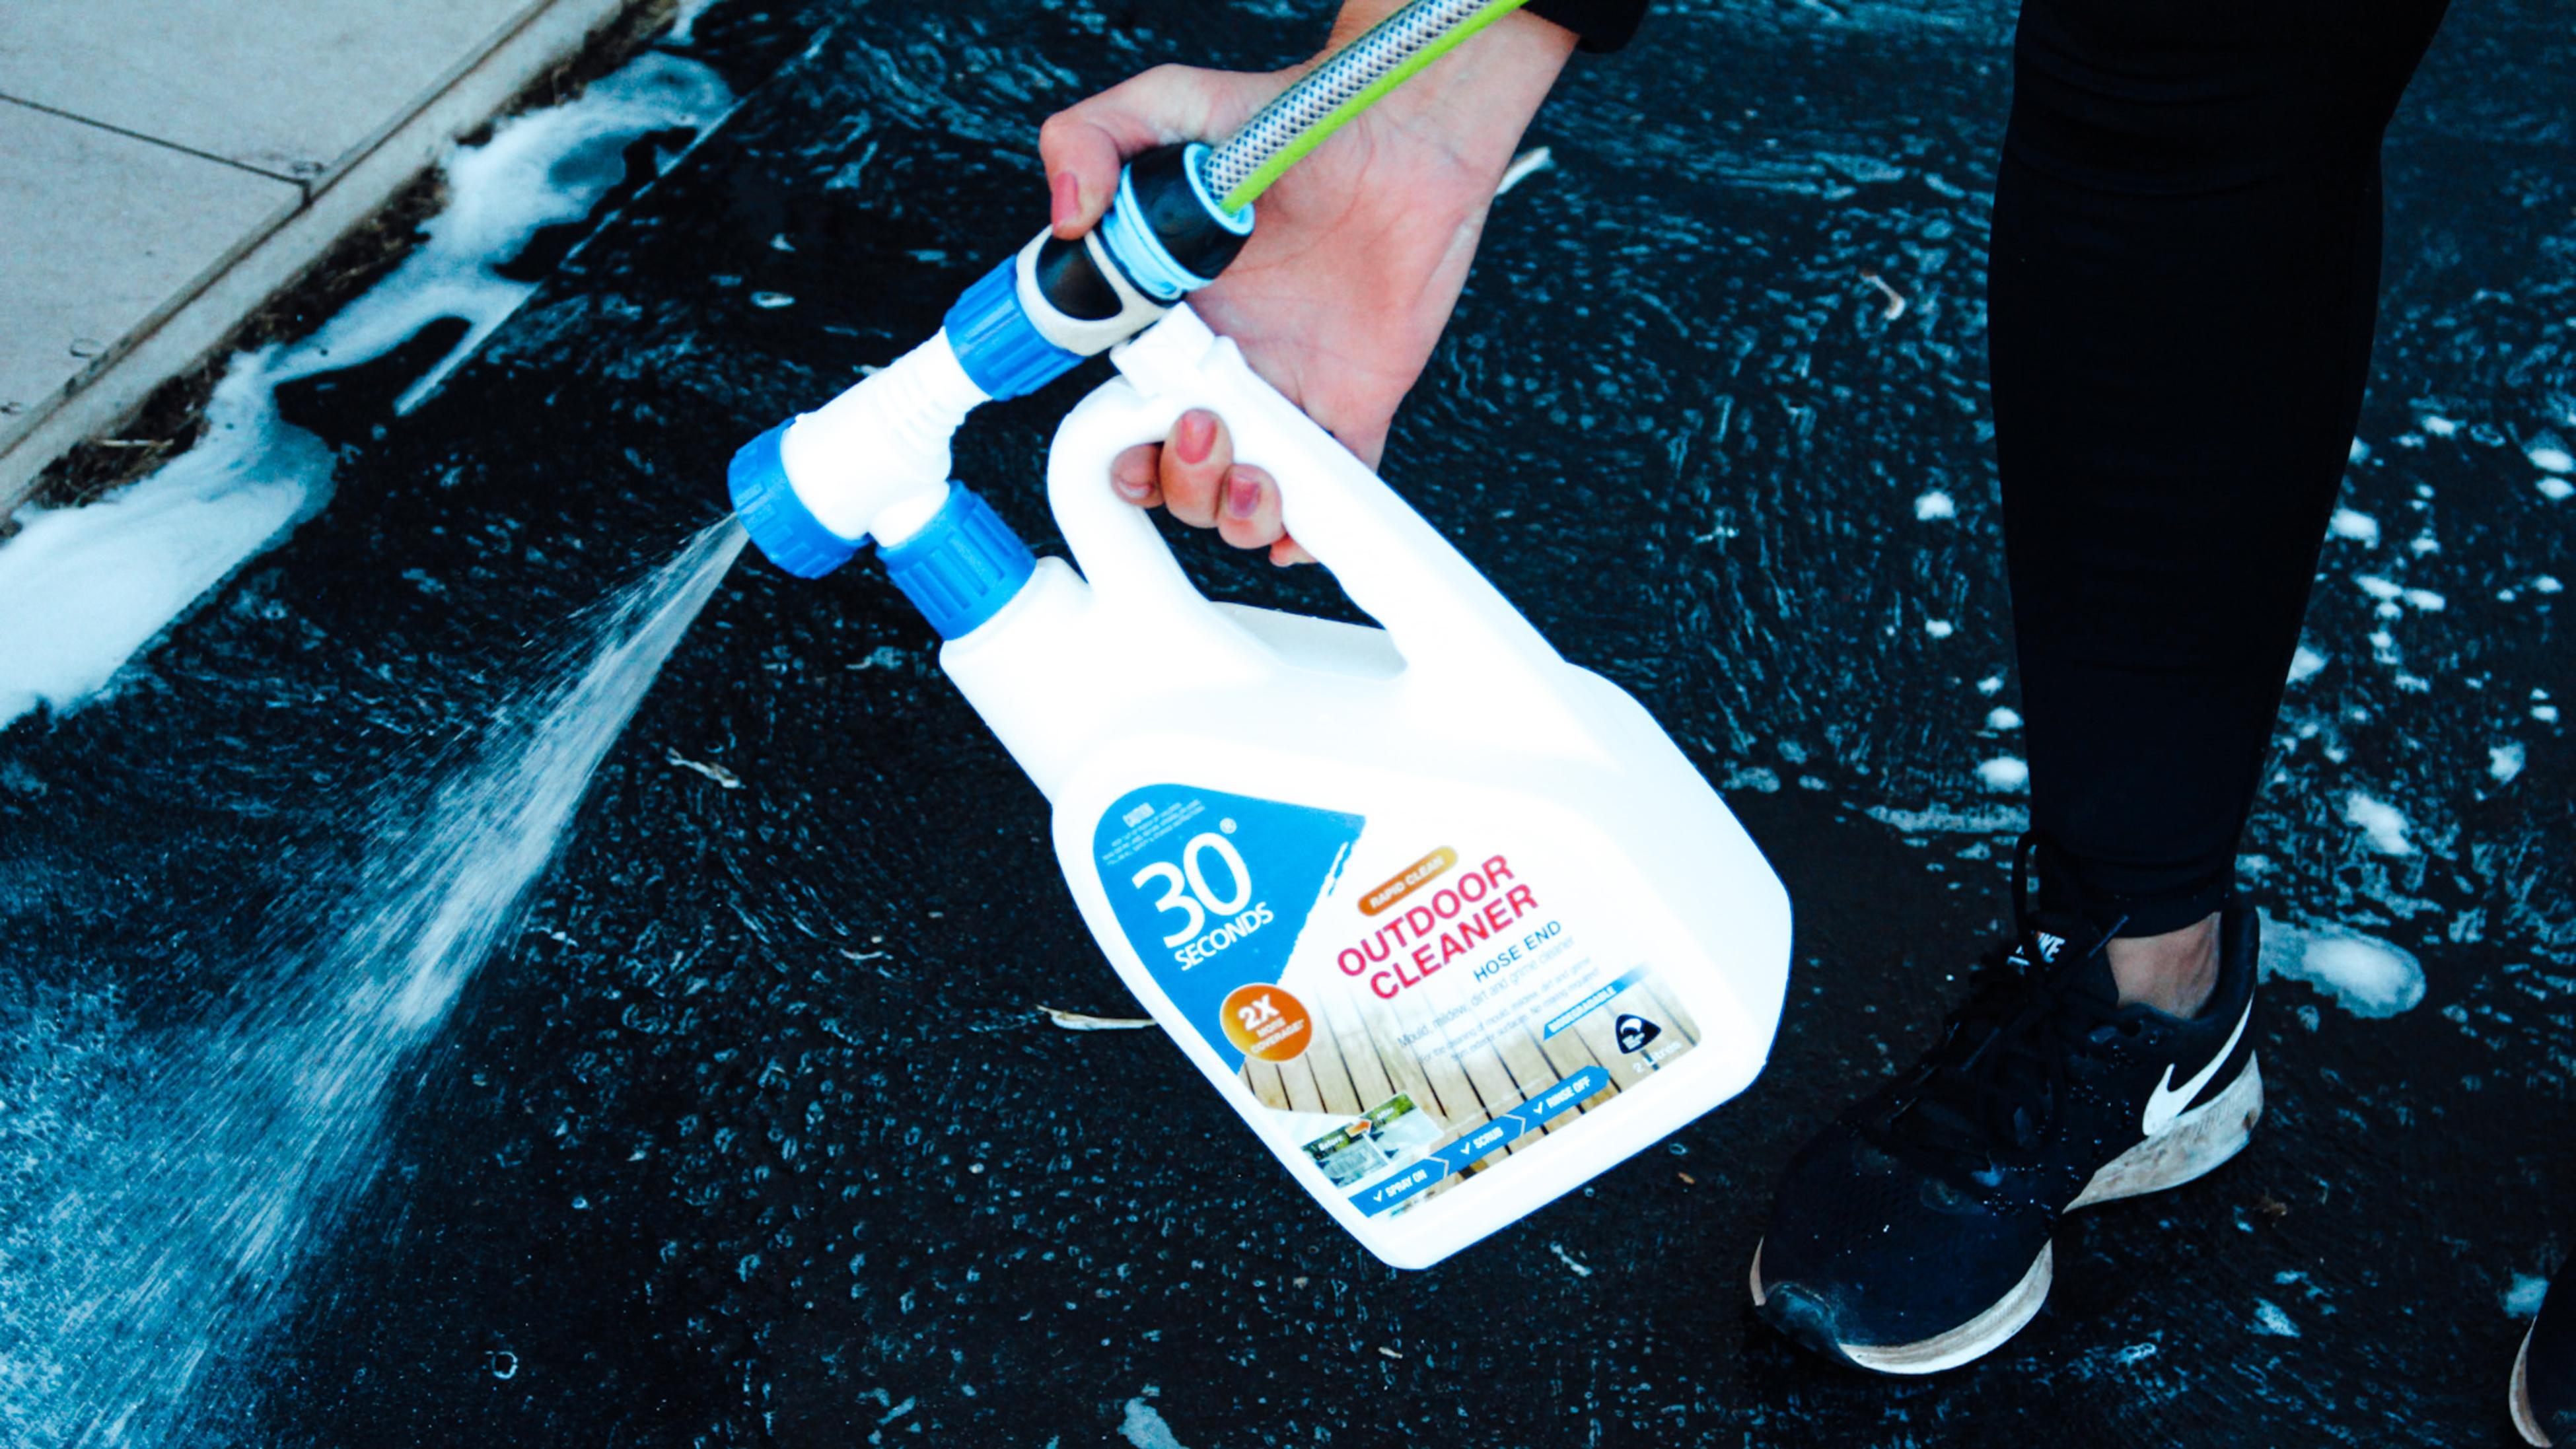 30 seconds outdoor cleaner bottle in a user's hand, bottle is attached to a hose with liquid being sprayed out onto the concrete.